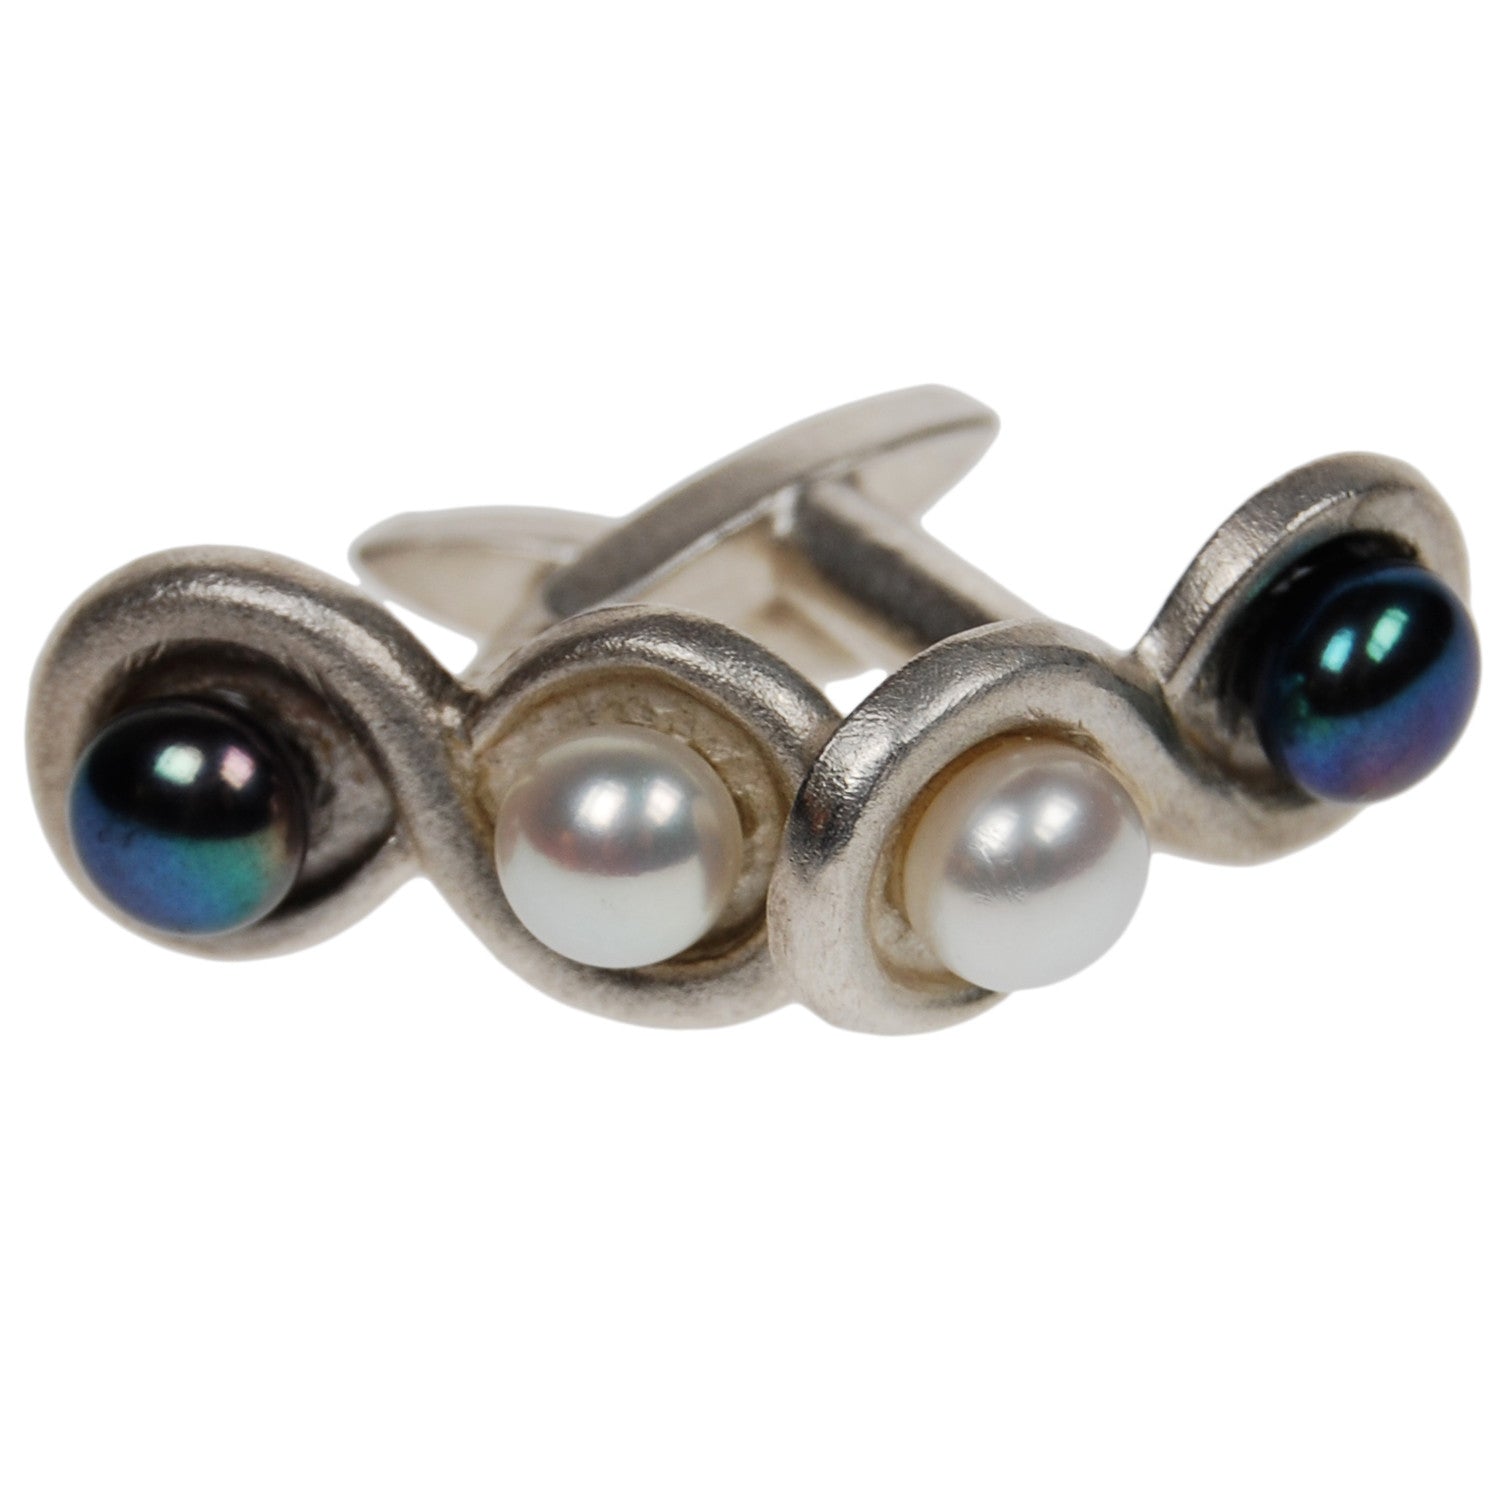 ﻿'Figure of Eight' Pearl Cufflinks in White and Peacock Black